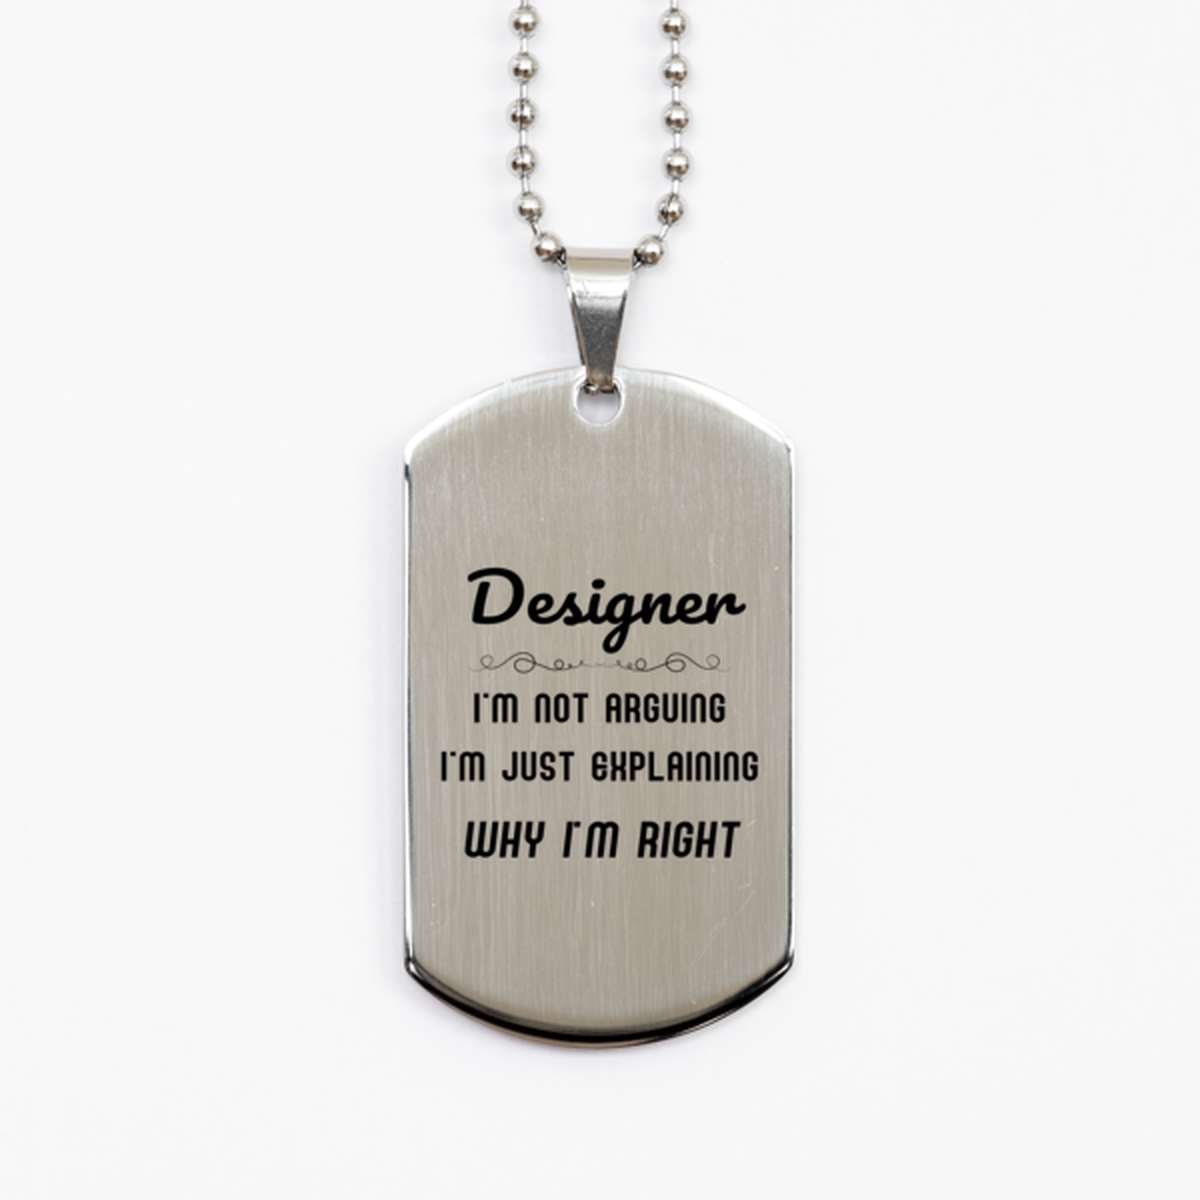 Designer I'm not Arguing. I'm Just Explaining Why I'm RIGHT Silver Dog Tag, Funny Saying Quote Designer Gifts For Designer Graduation Birthday Christmas Gifts for Men Women Coworker